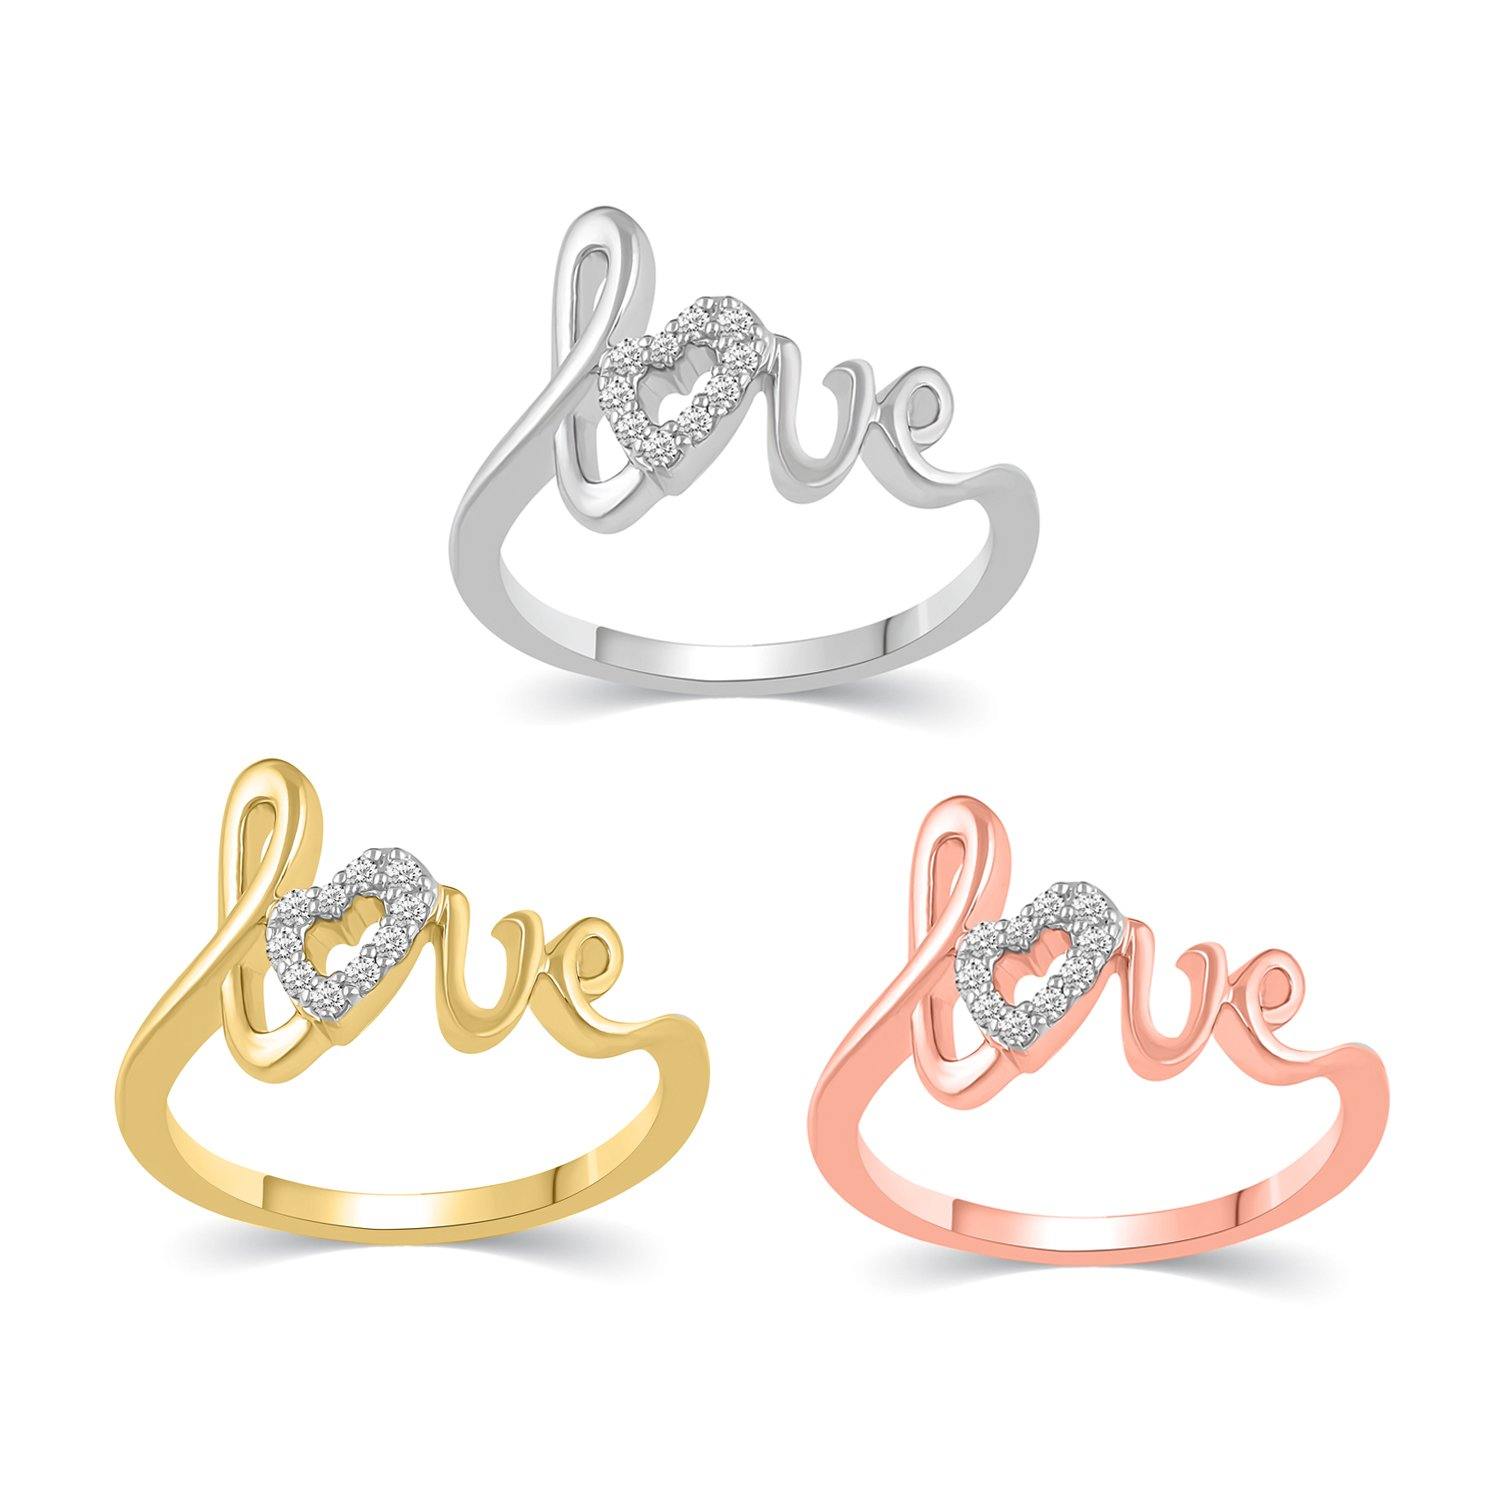 Stainless Steel Heart Love Self Defence Ring Elegant Design In For Couples  Designer Fashion Jewelry For Women Perfect Party Gift From Hotjewelry11,  $5.18 | DHgate.Com